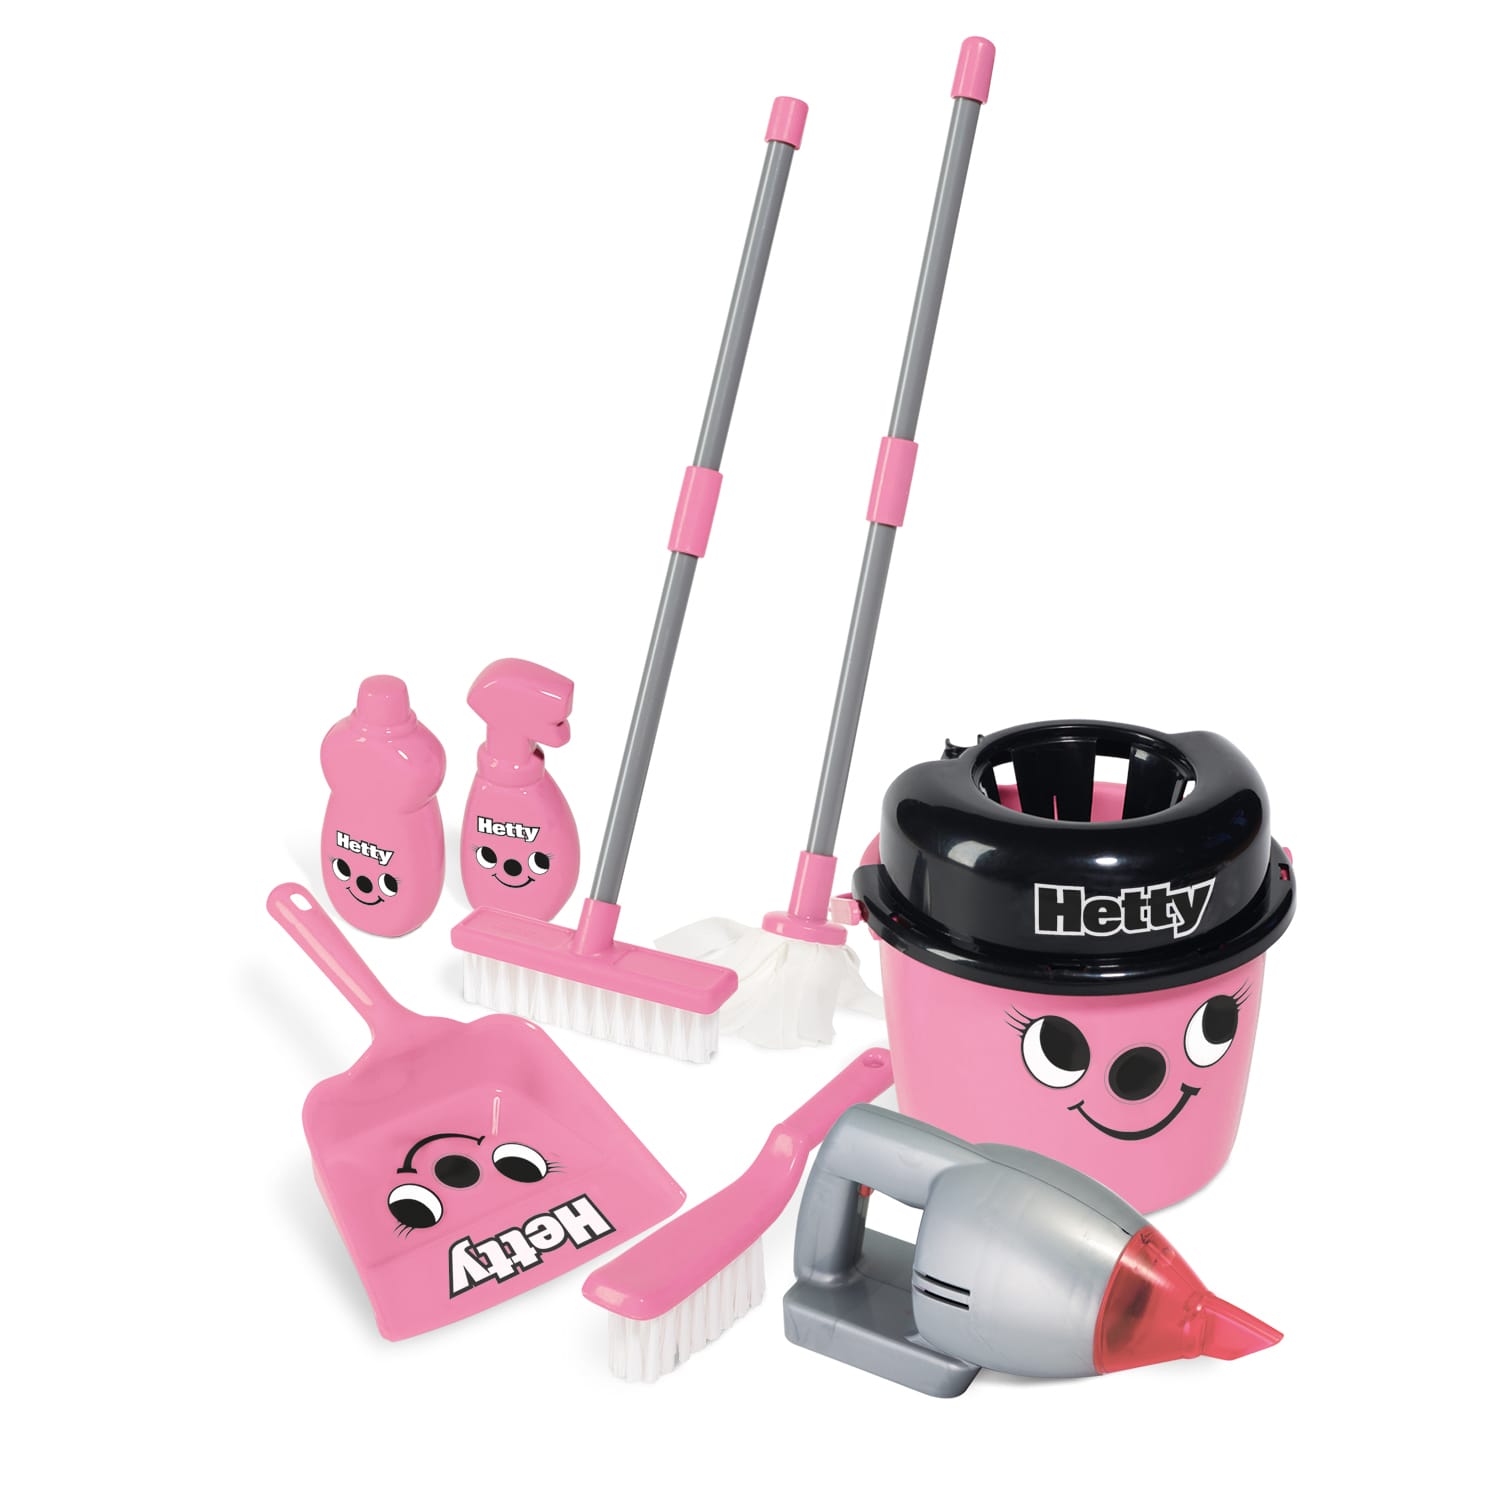 Details about   Casdon Deluxe Hetty The Hoover Cleaning Trolley Kids Fun Gift Toy 